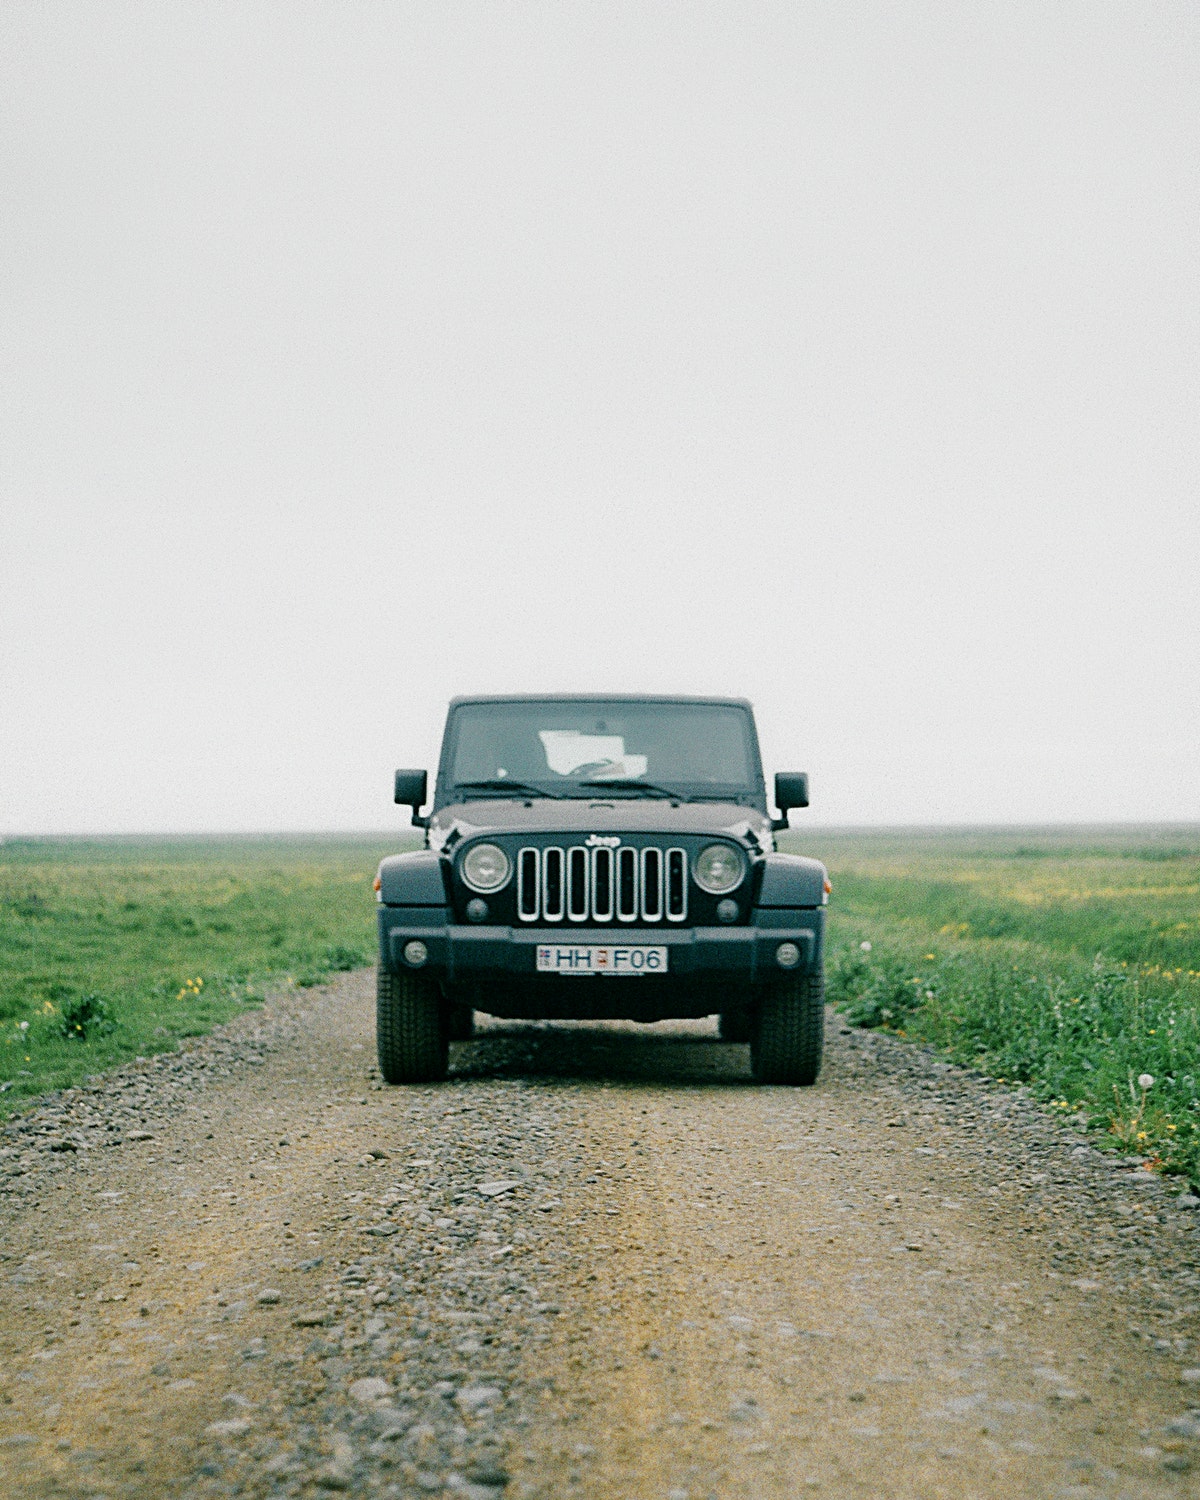 From Workhorse to Leisure Vehicle: A History of the Jeep